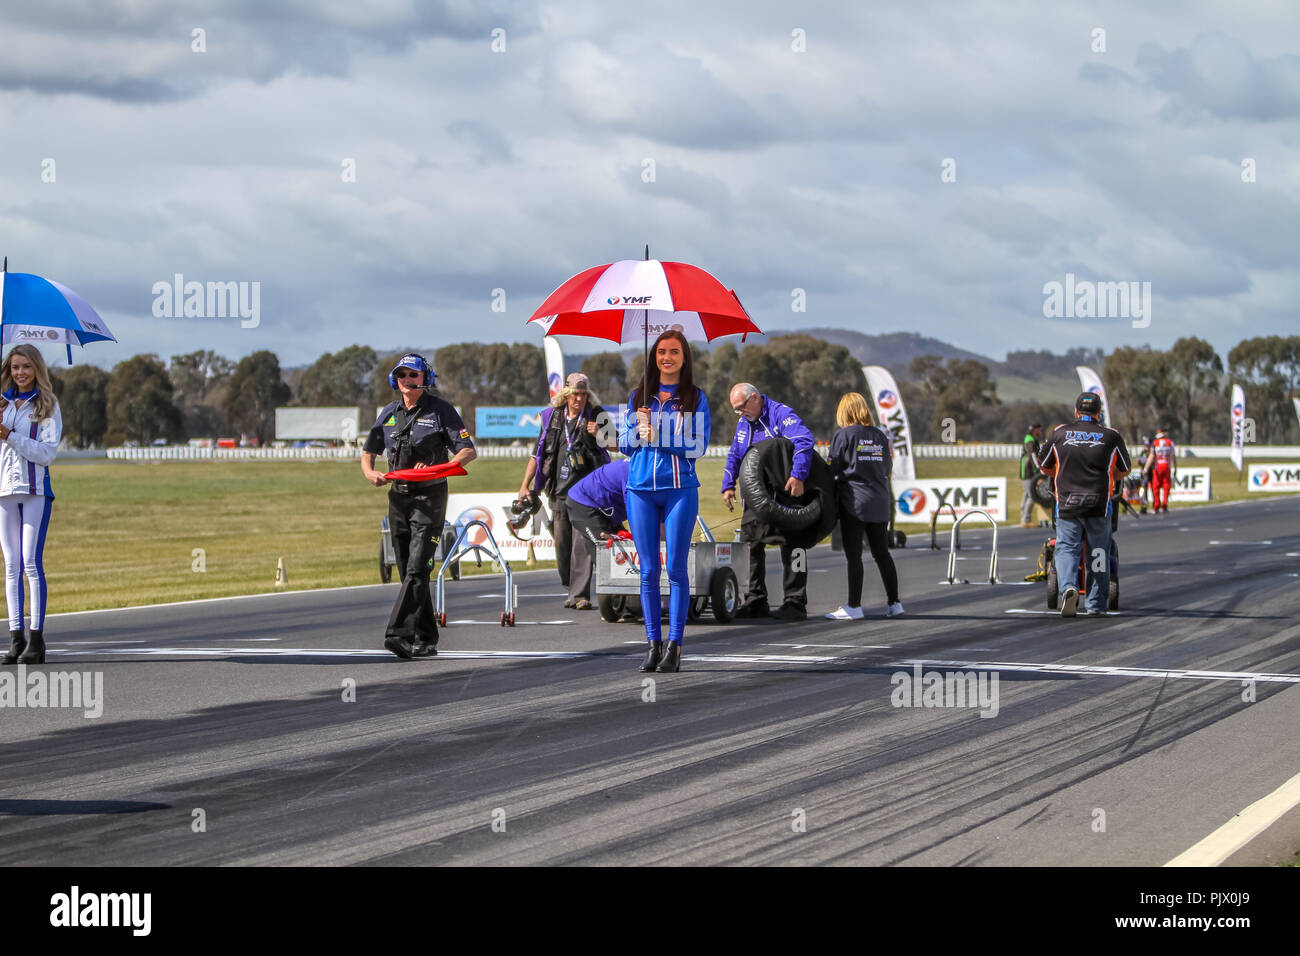 Victoria, Australia. 9th September 2018. On the Grid ready for race One of two for round six of the ASBK Credit: brett keating/Alamy Live News Stock Photo